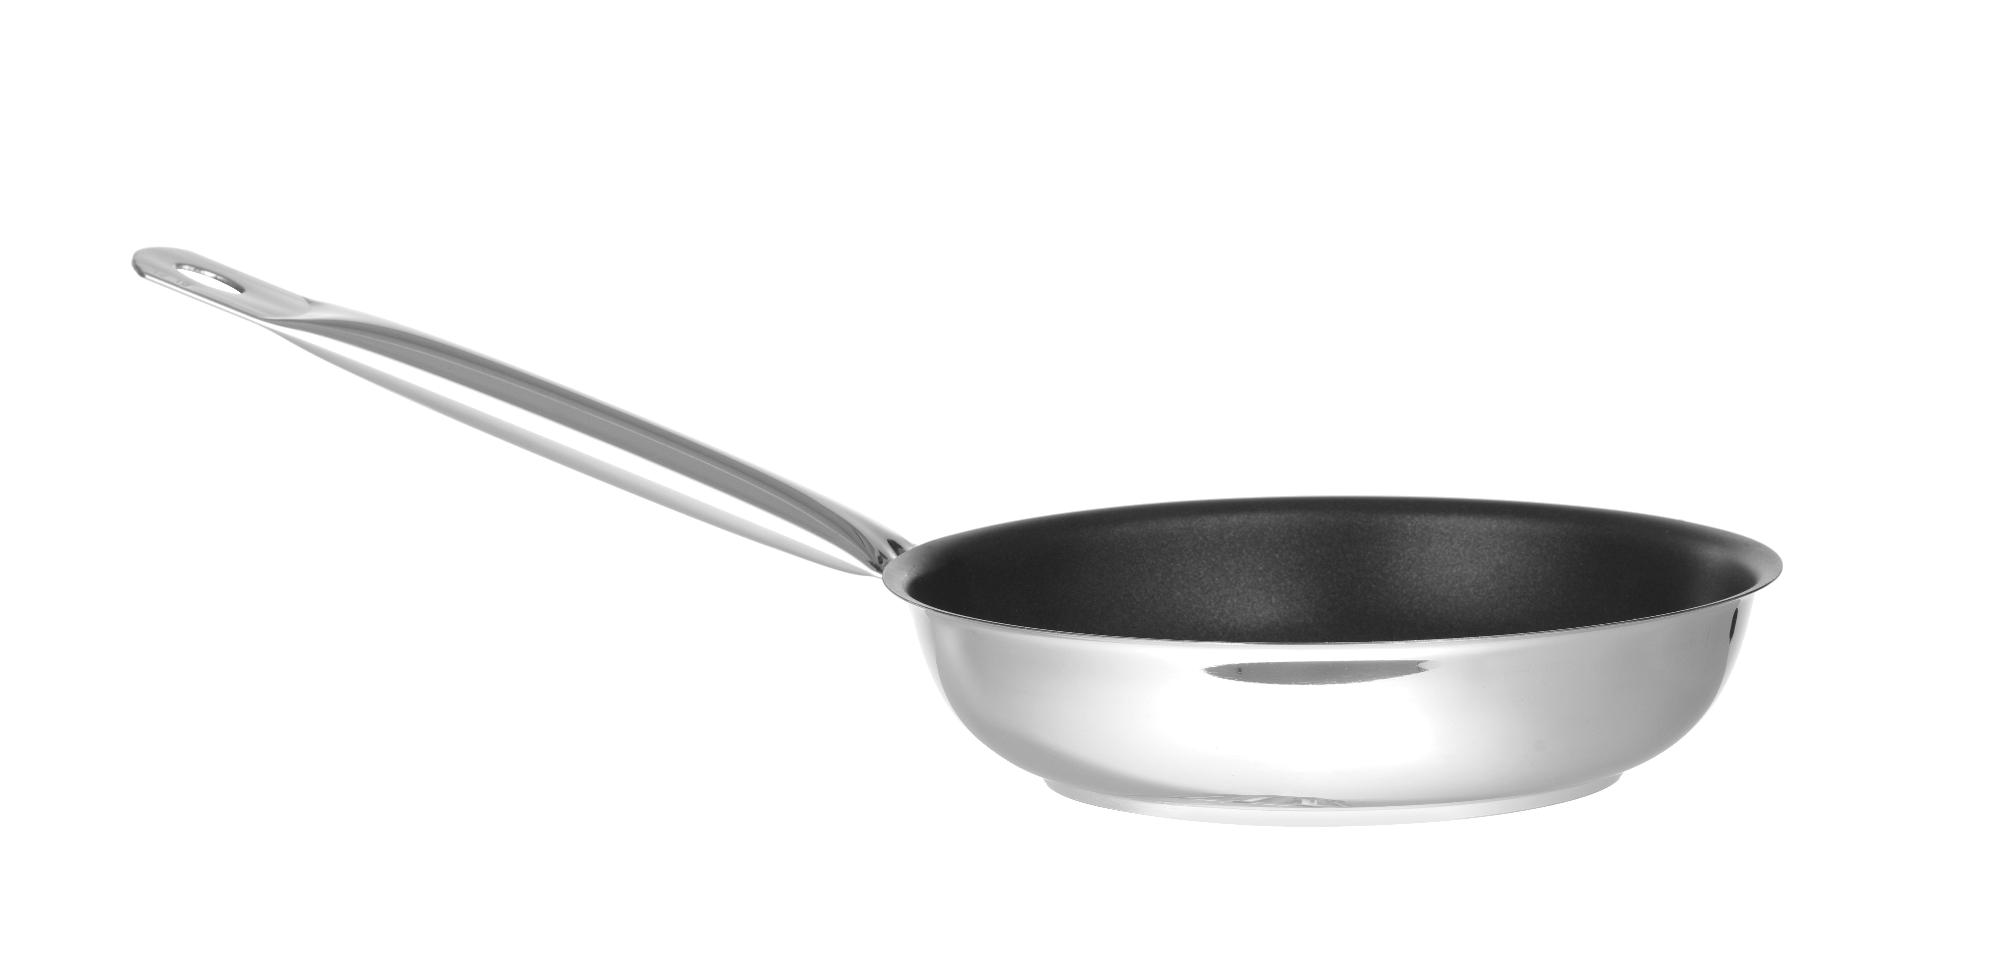 Non-stick coated frying pan, 280mm